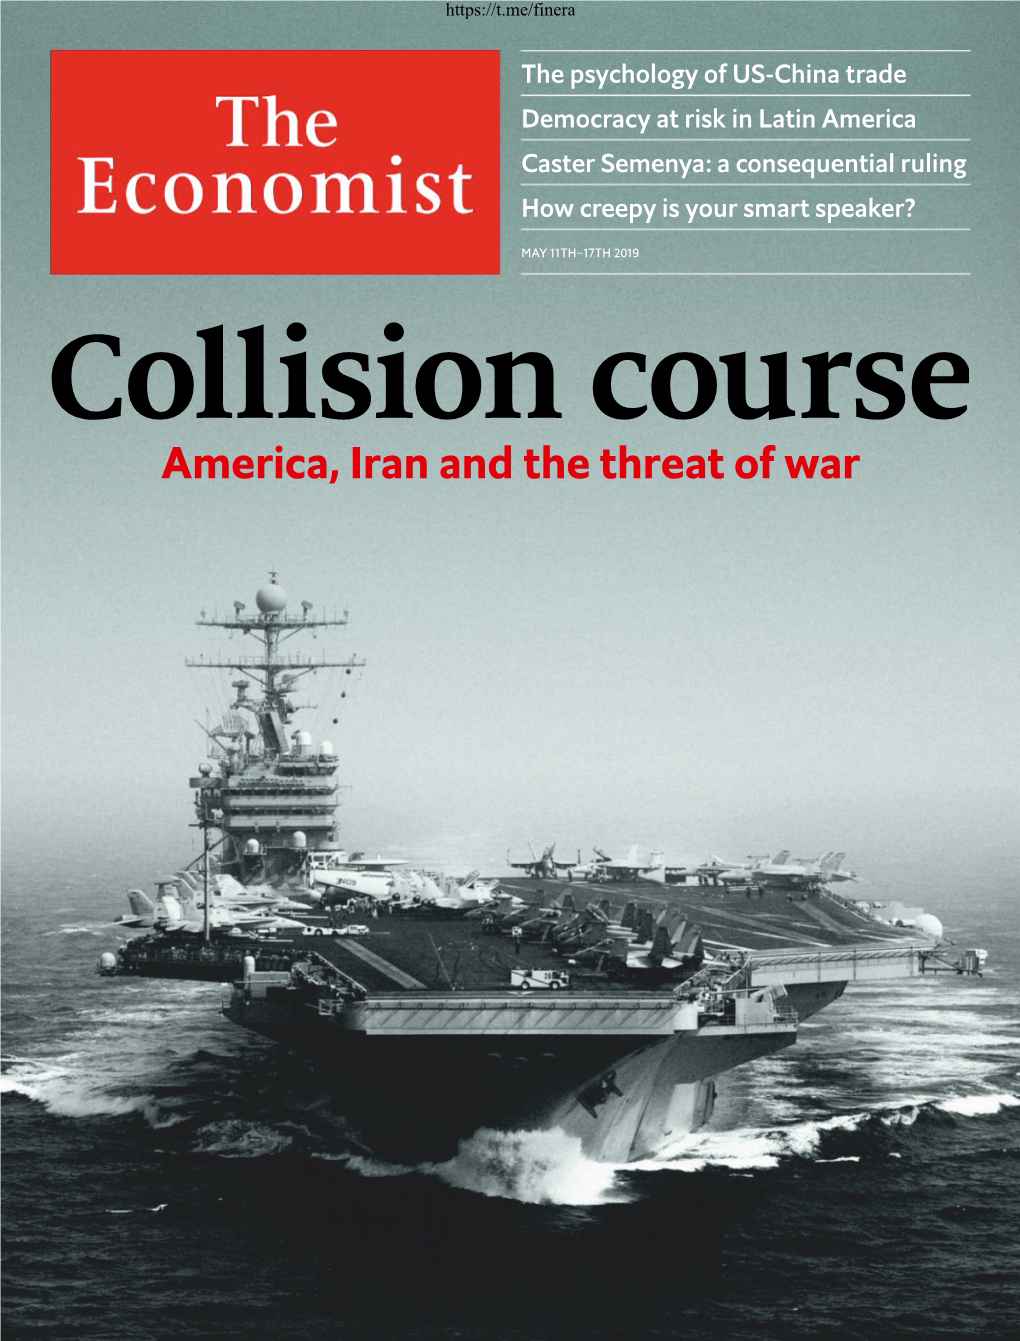 America, Iran and the Threat of War Financial Era Advisory Group Contents the Economist May 11Th 2019 3